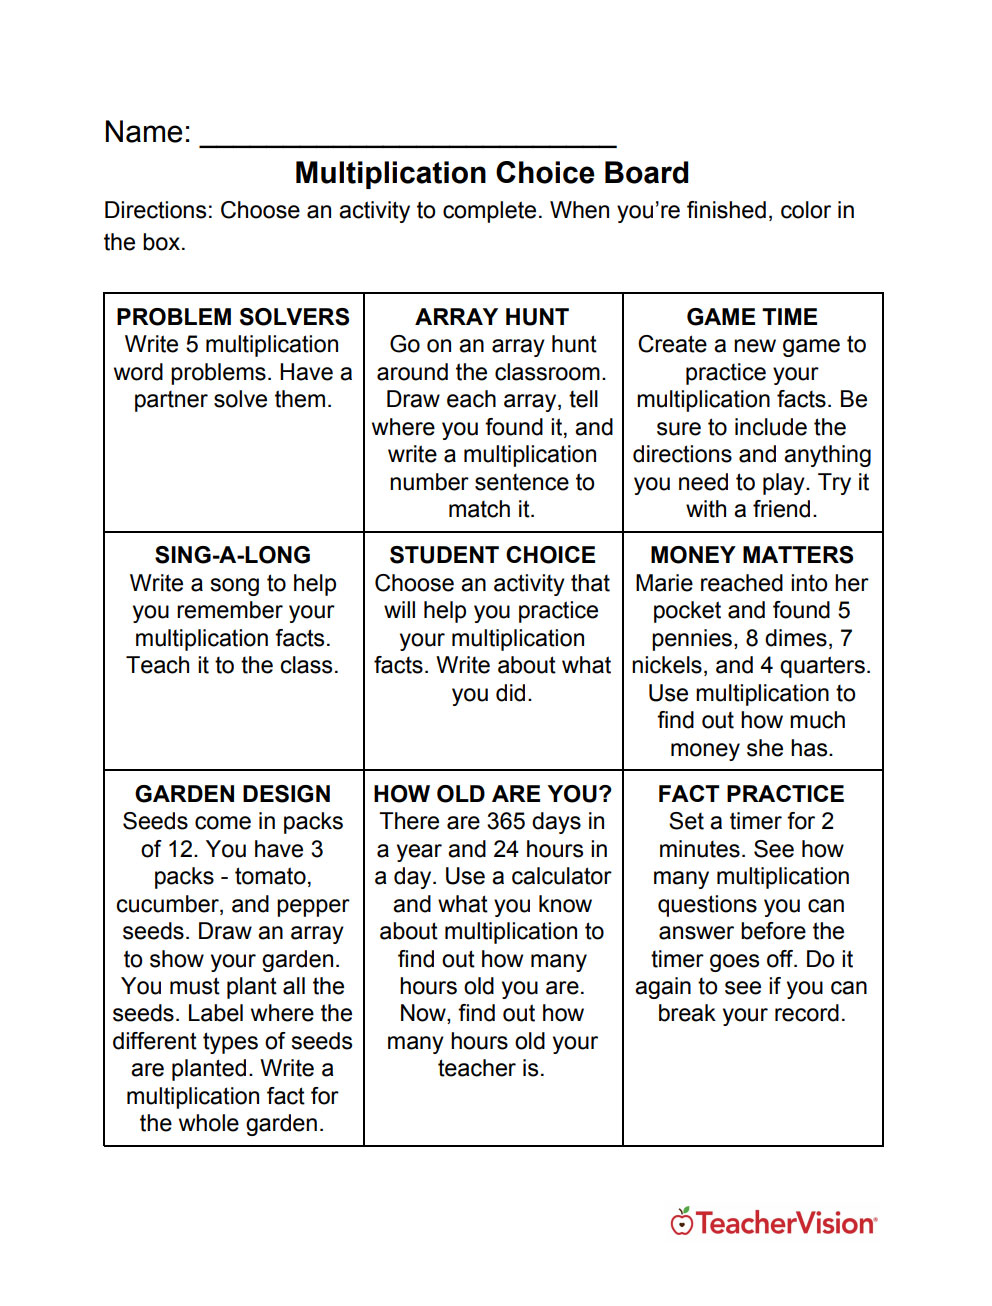 A choice board with nine activities for practicing multiplication